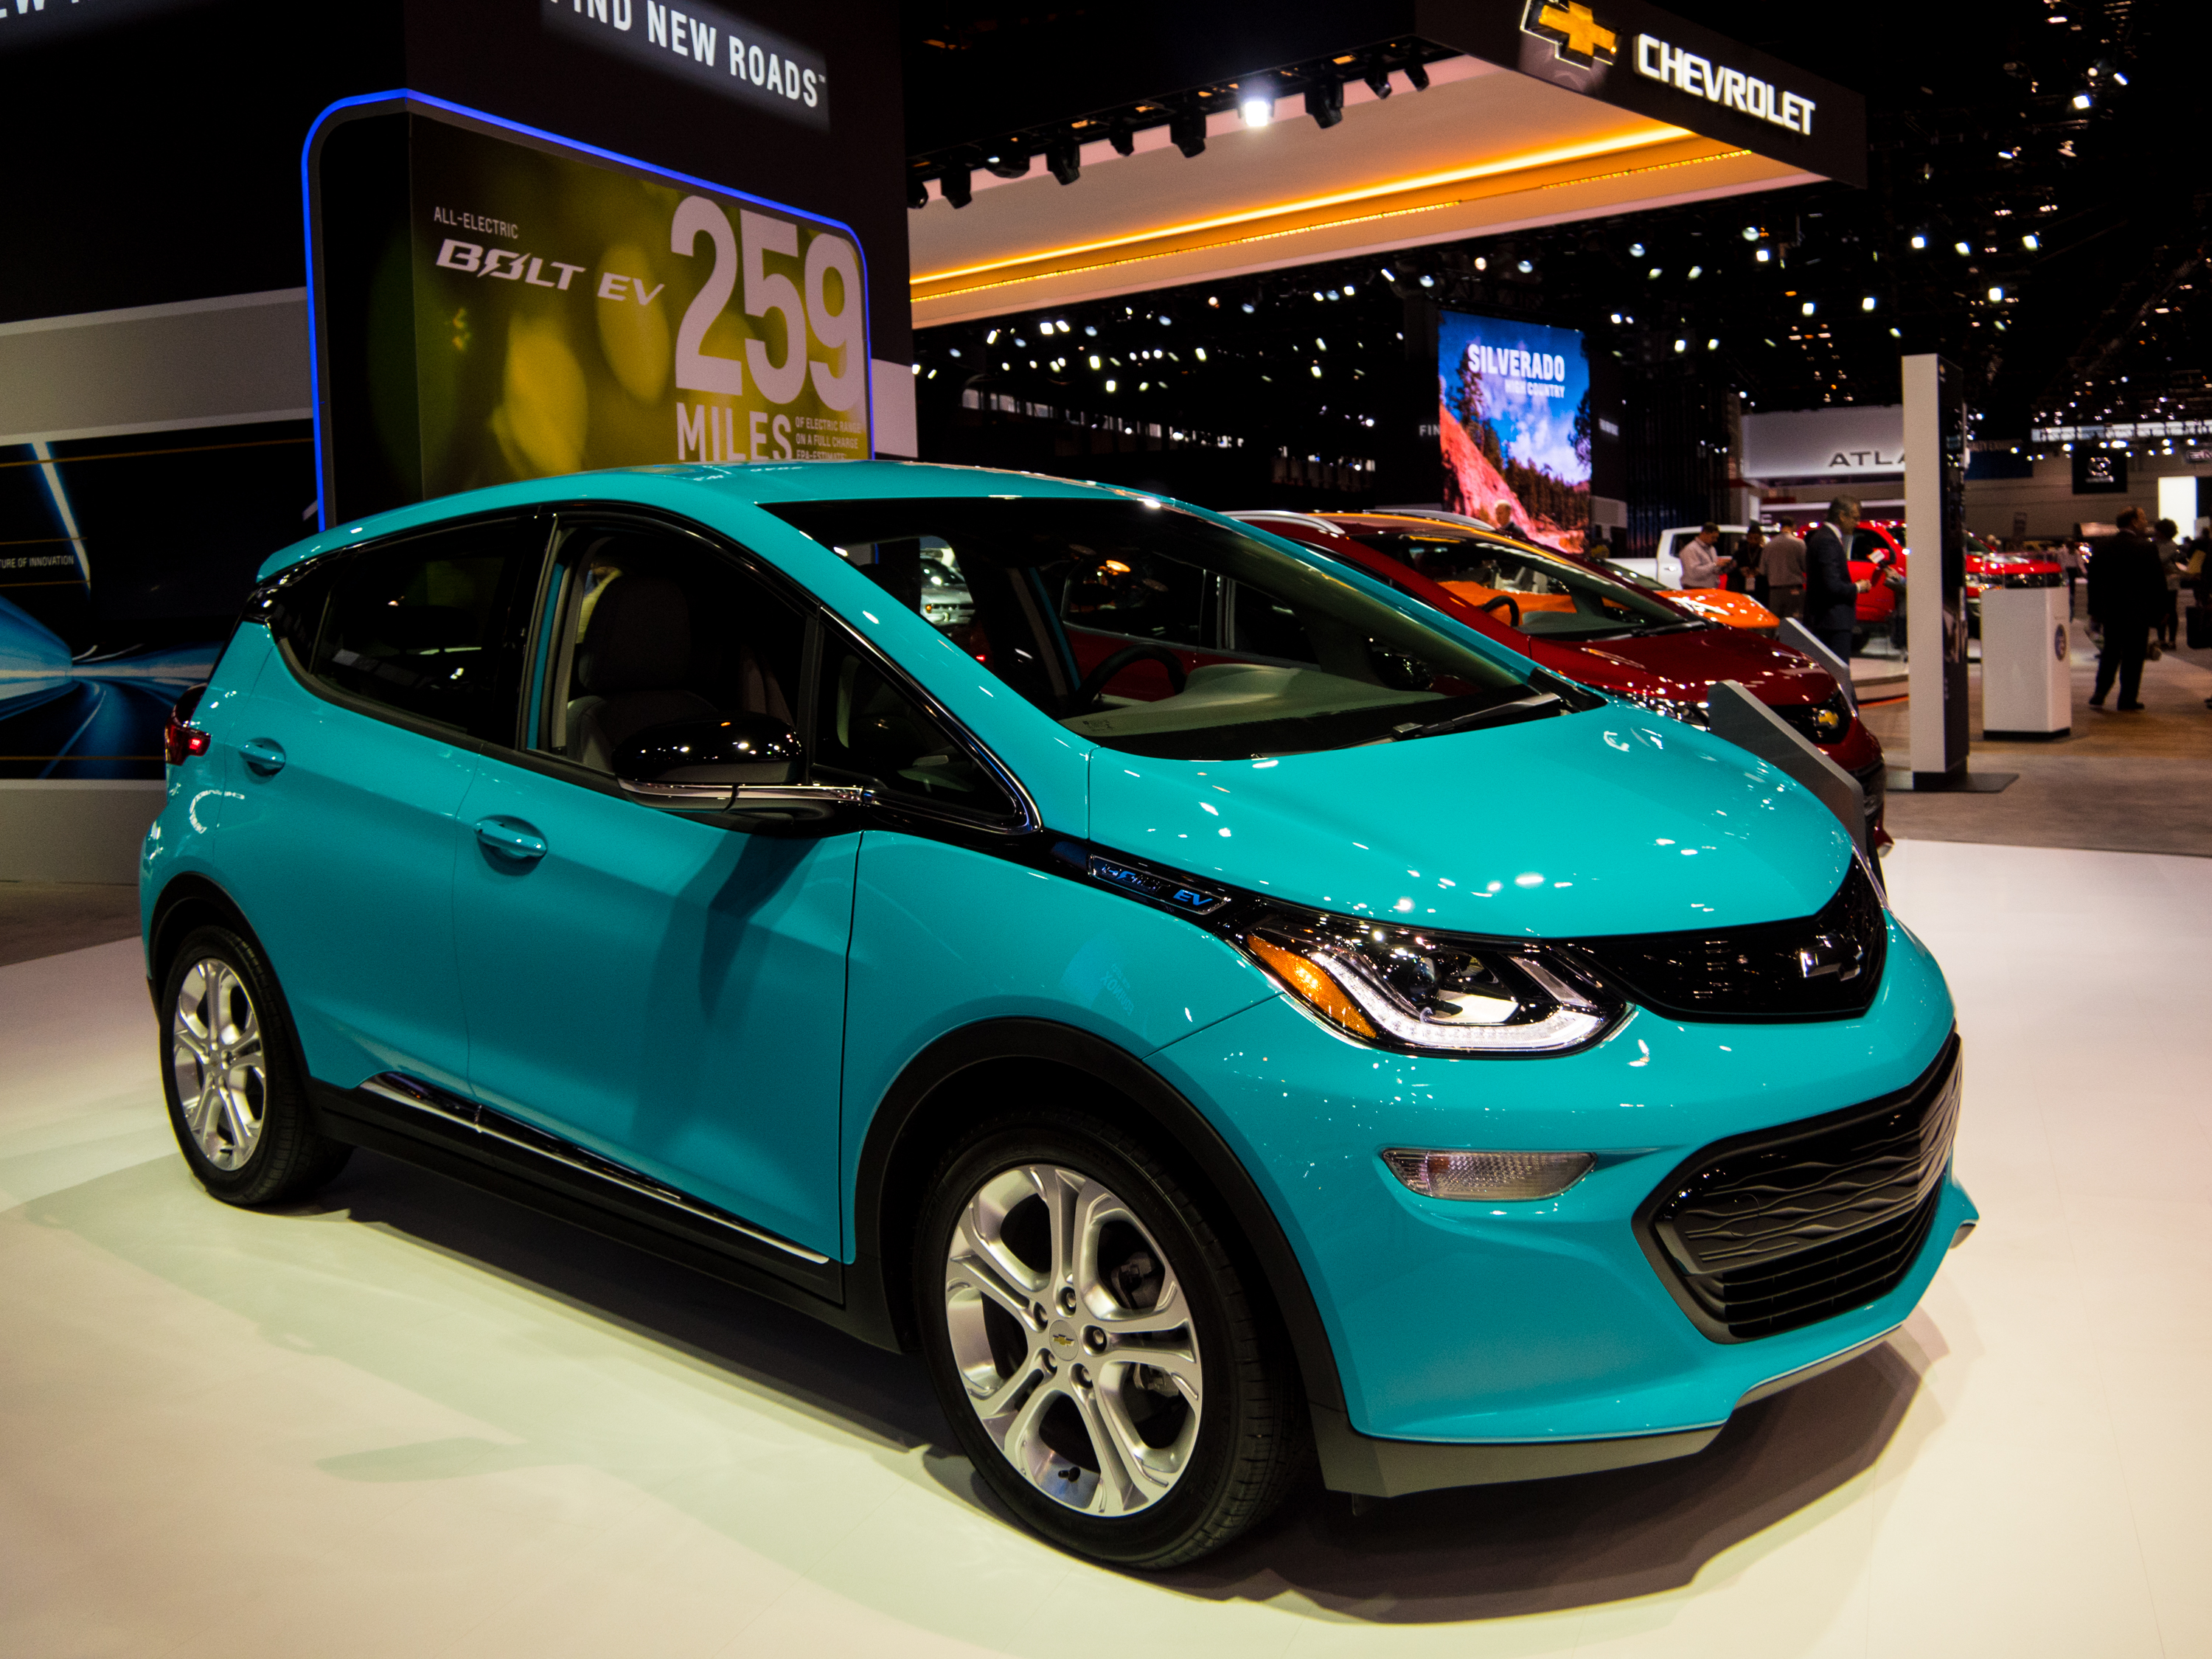 2020 Chevy Bolt review: A good EV that's showing its age - CNET